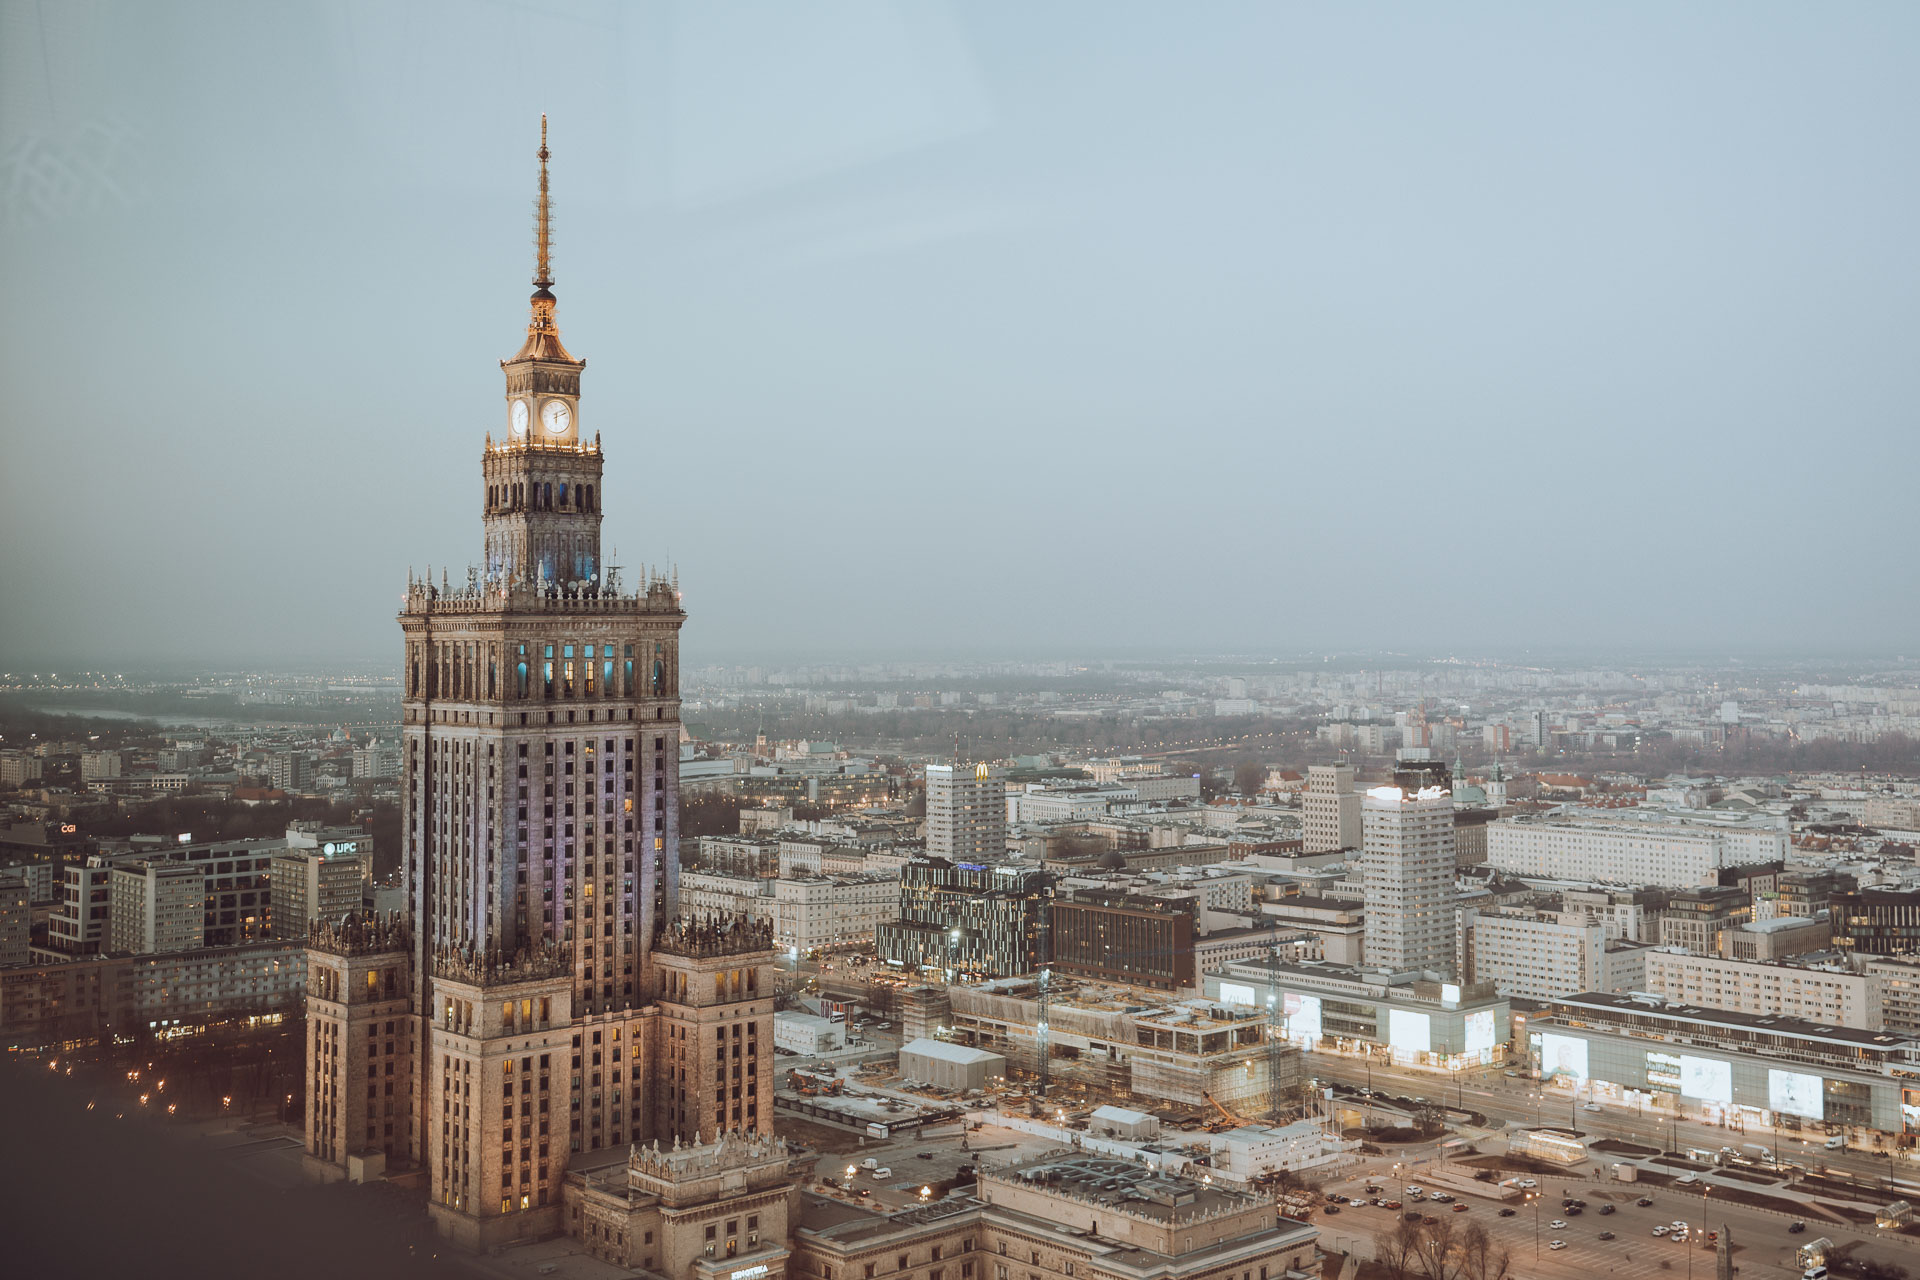 The view from the Panorama Sky Bar of the Marriott Hotel is one of the best views in Warsaw, Poland. We see the Palace of Culture and Science at dawn, lighting up with blue and yellow as a solidarity gesture toward Ukrainians.